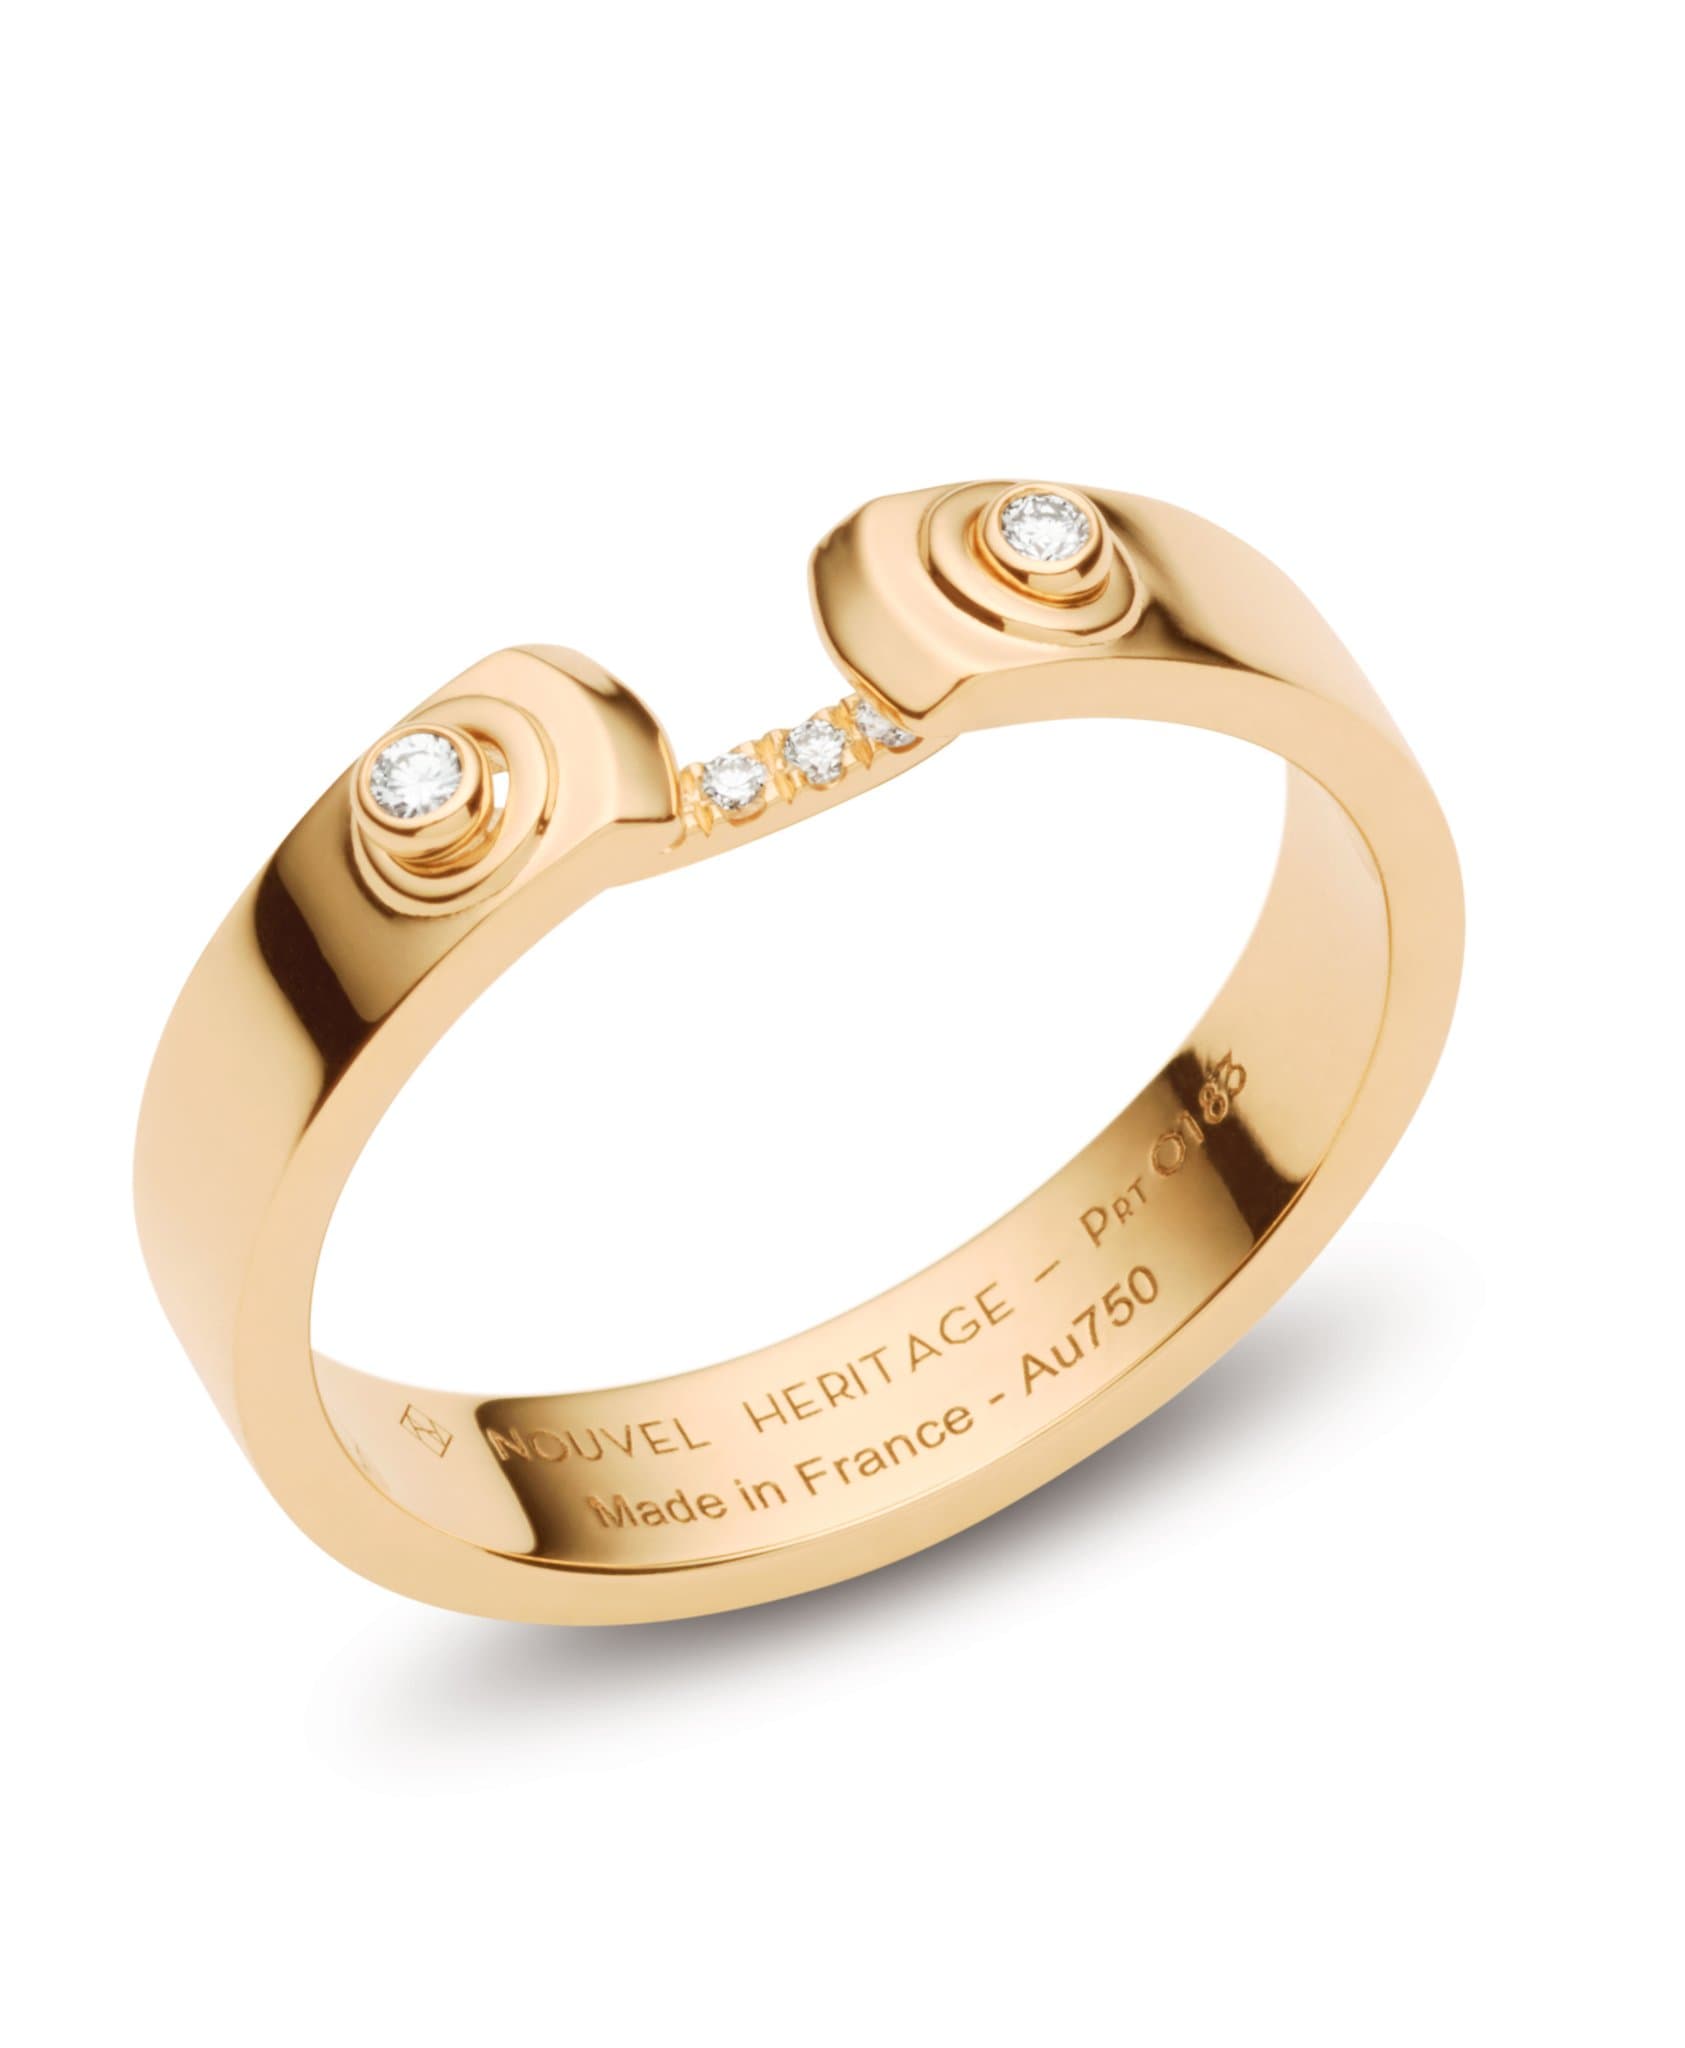 Business Meeting Mood Ring: Discover Luxury Fine Jewelry | Nouvel Heritage || Yellow Gold